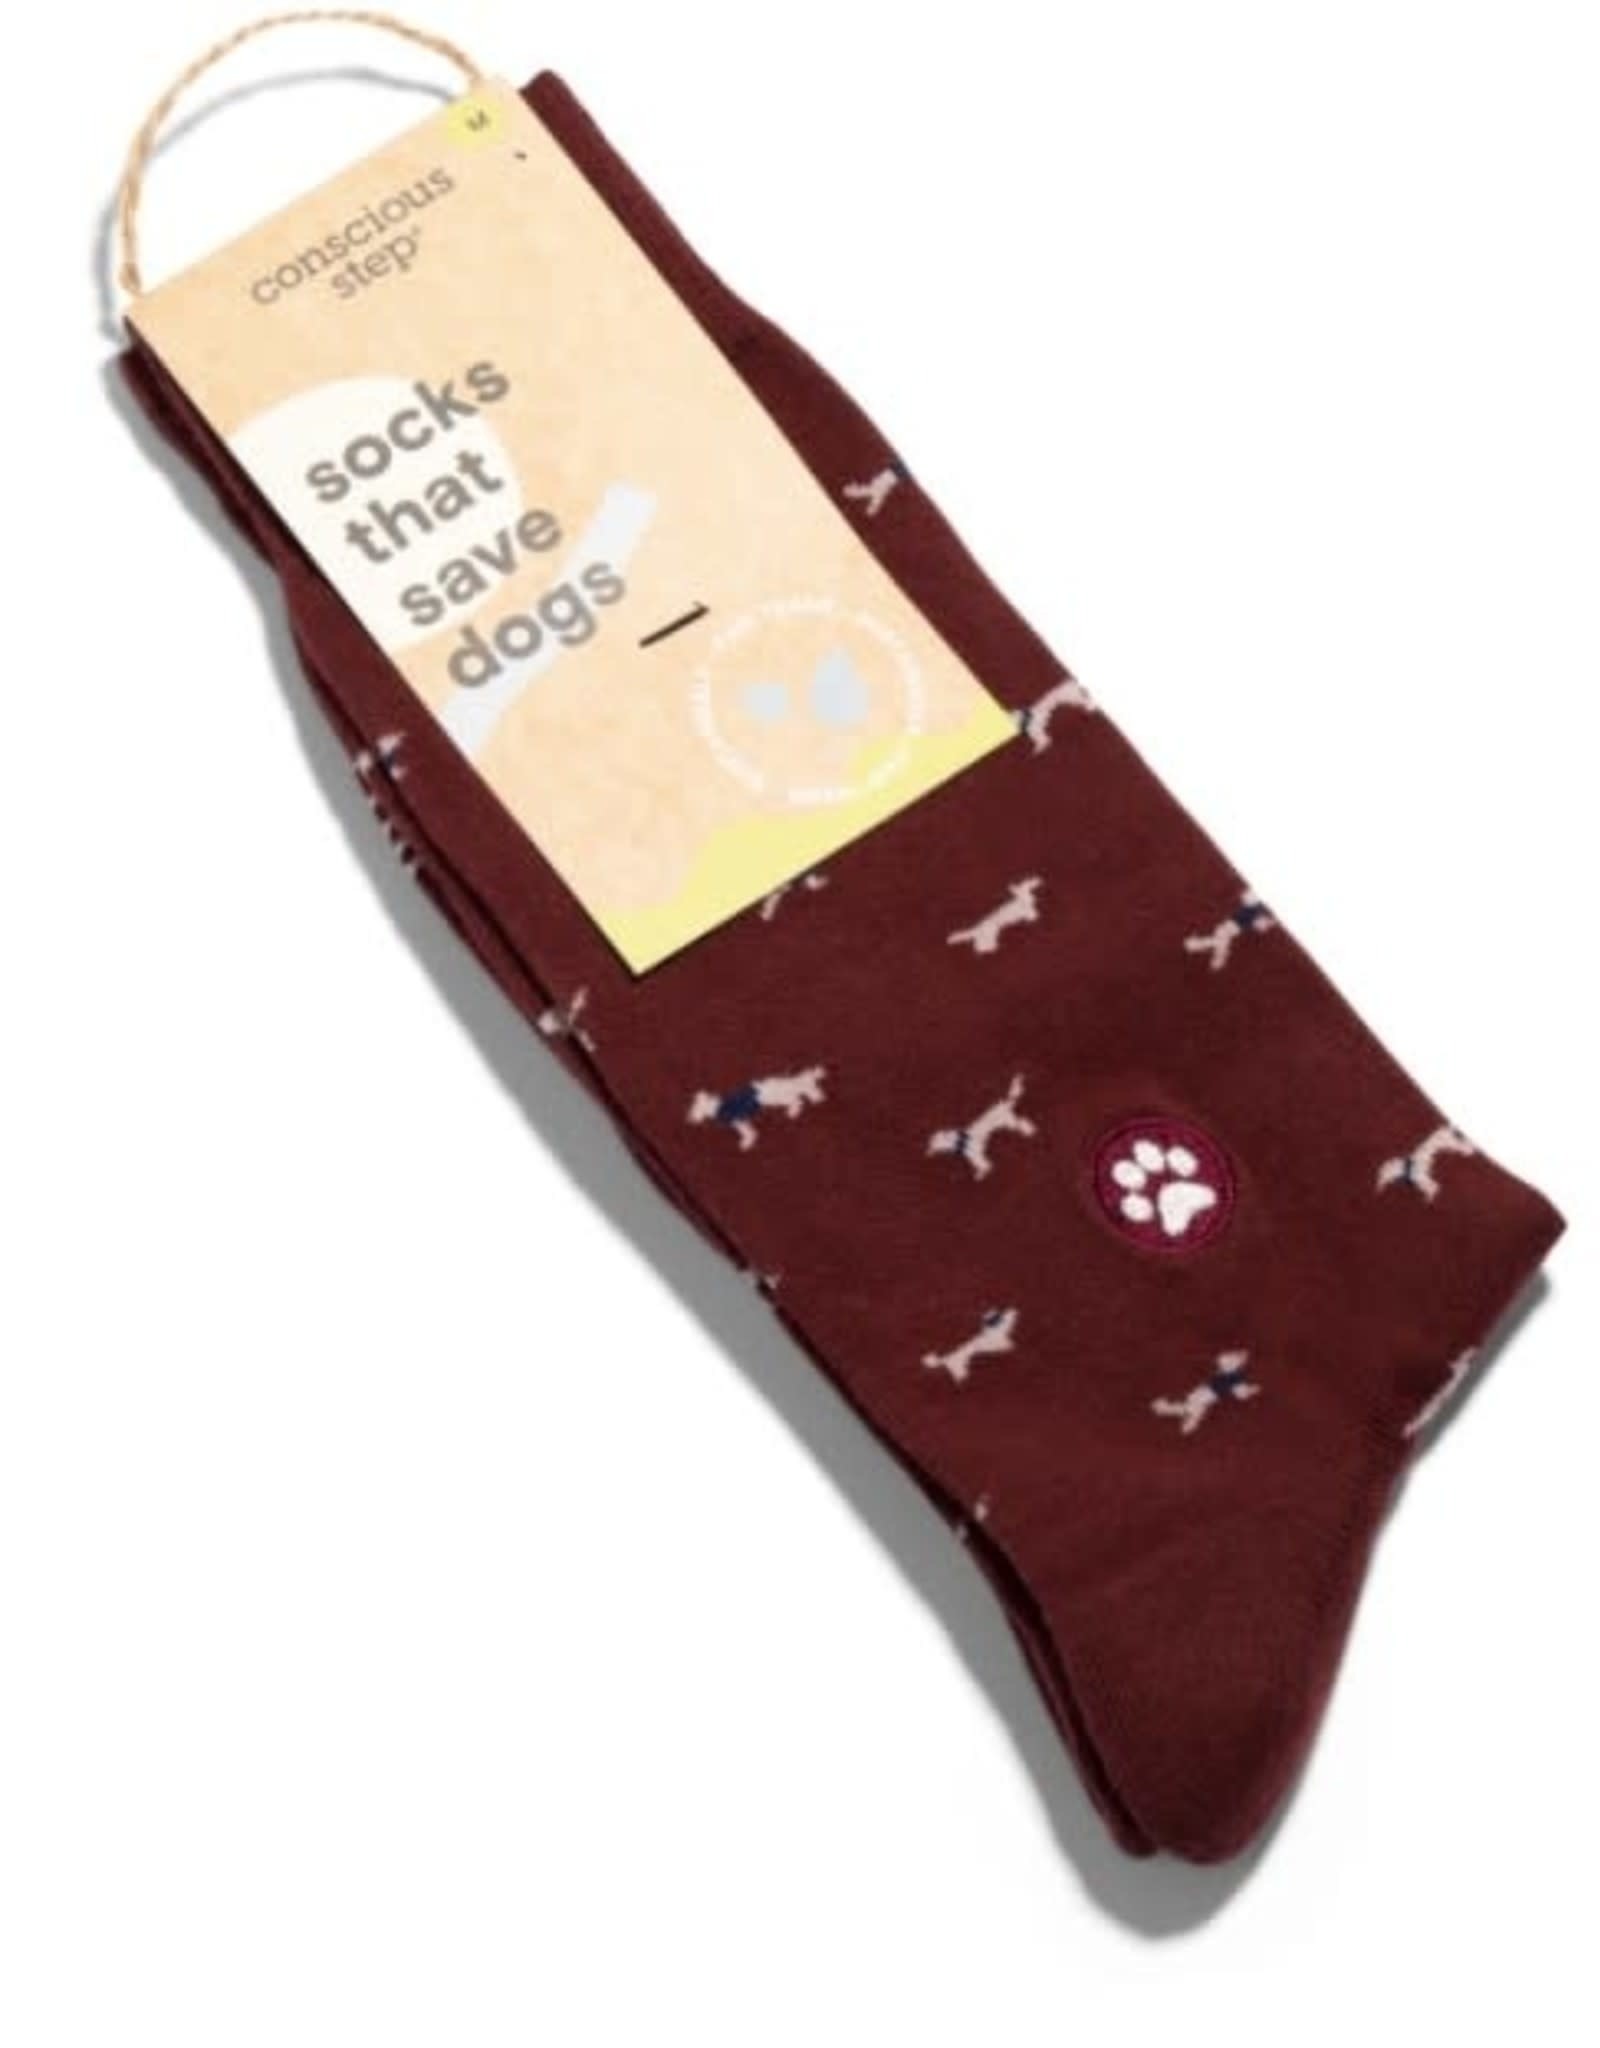 Conscious Step Socks that Save Dogs (Burgundy)